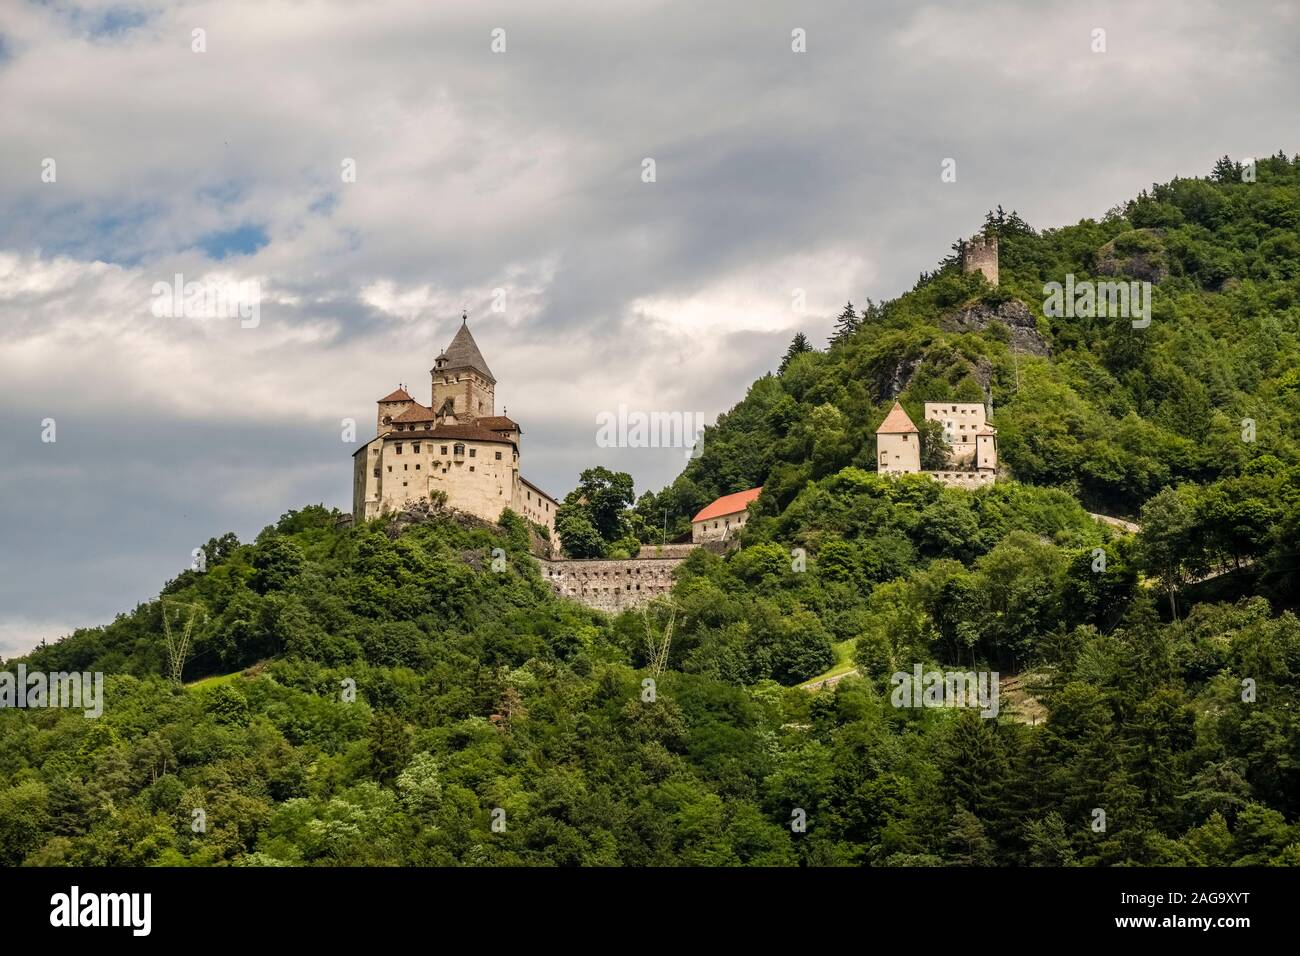 Juval Castle, a medieval castle located at the entrance of the Schnalstal, is the summer residence of the mountaineer Reinhold Messner Stock Photo